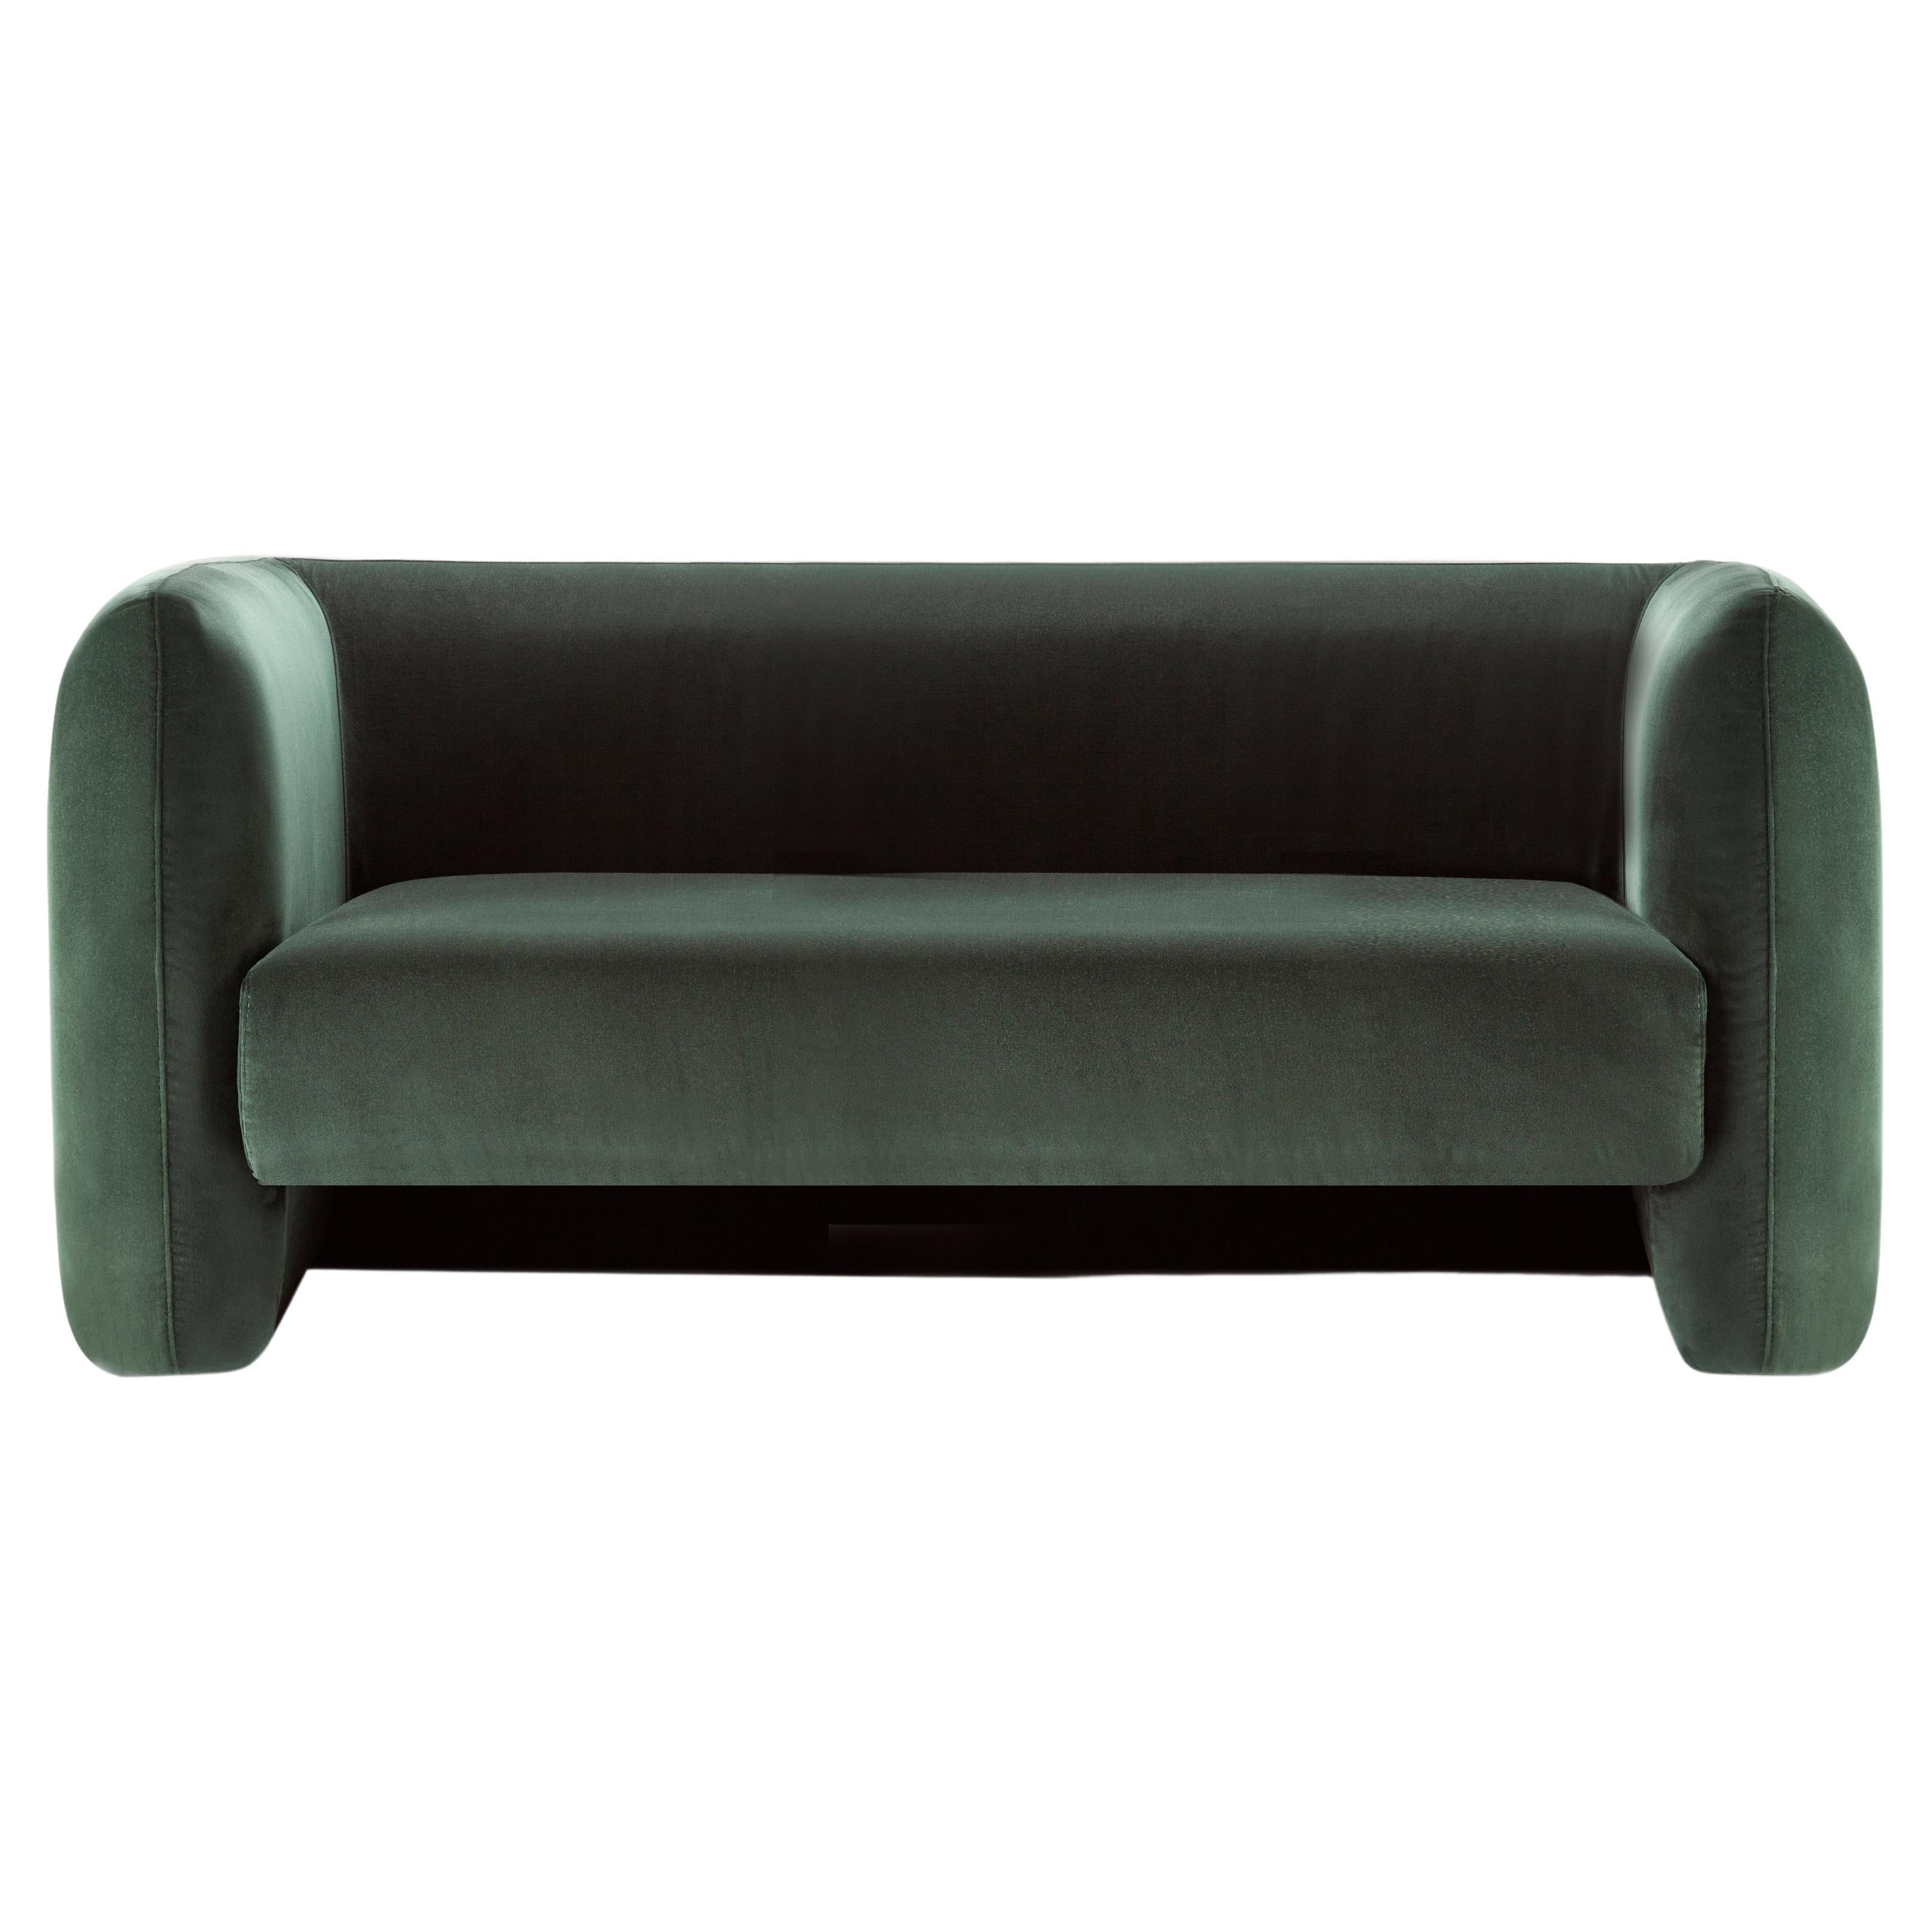 Contemporary Modern Jacob Sofa in Green Velvet Fabric by Collector Studio For Sale